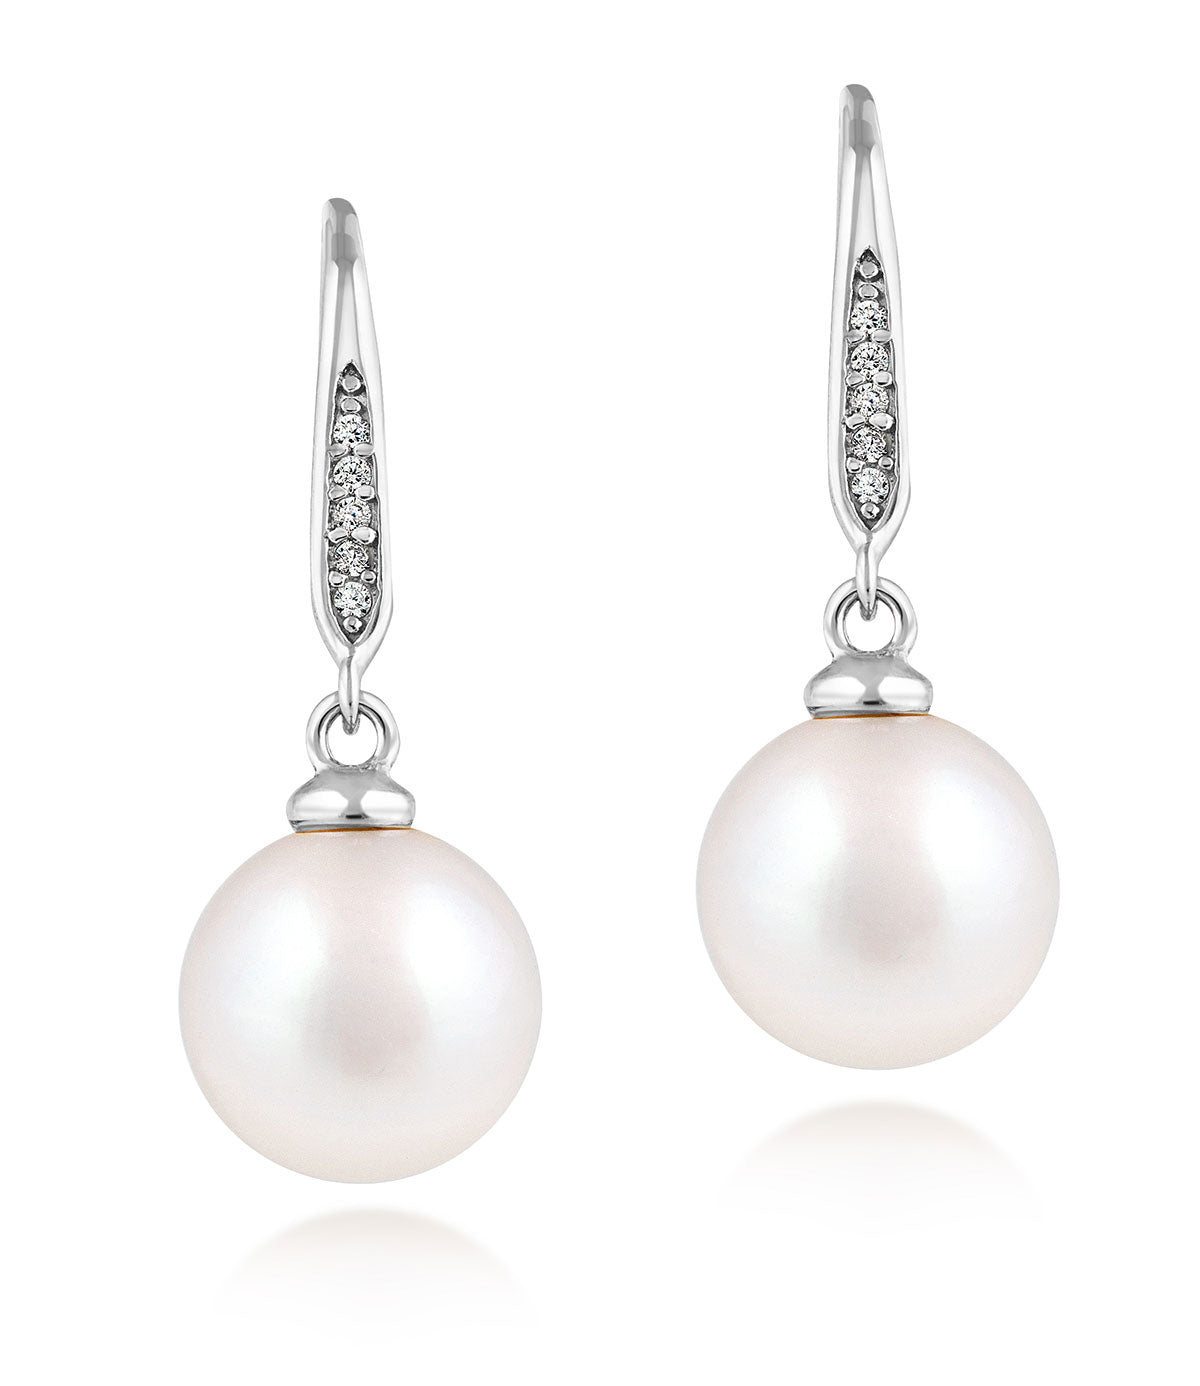 Pearl Drop Earrings Hook Back Rhodium Plated Sterling Silver with Cubic Zirconia